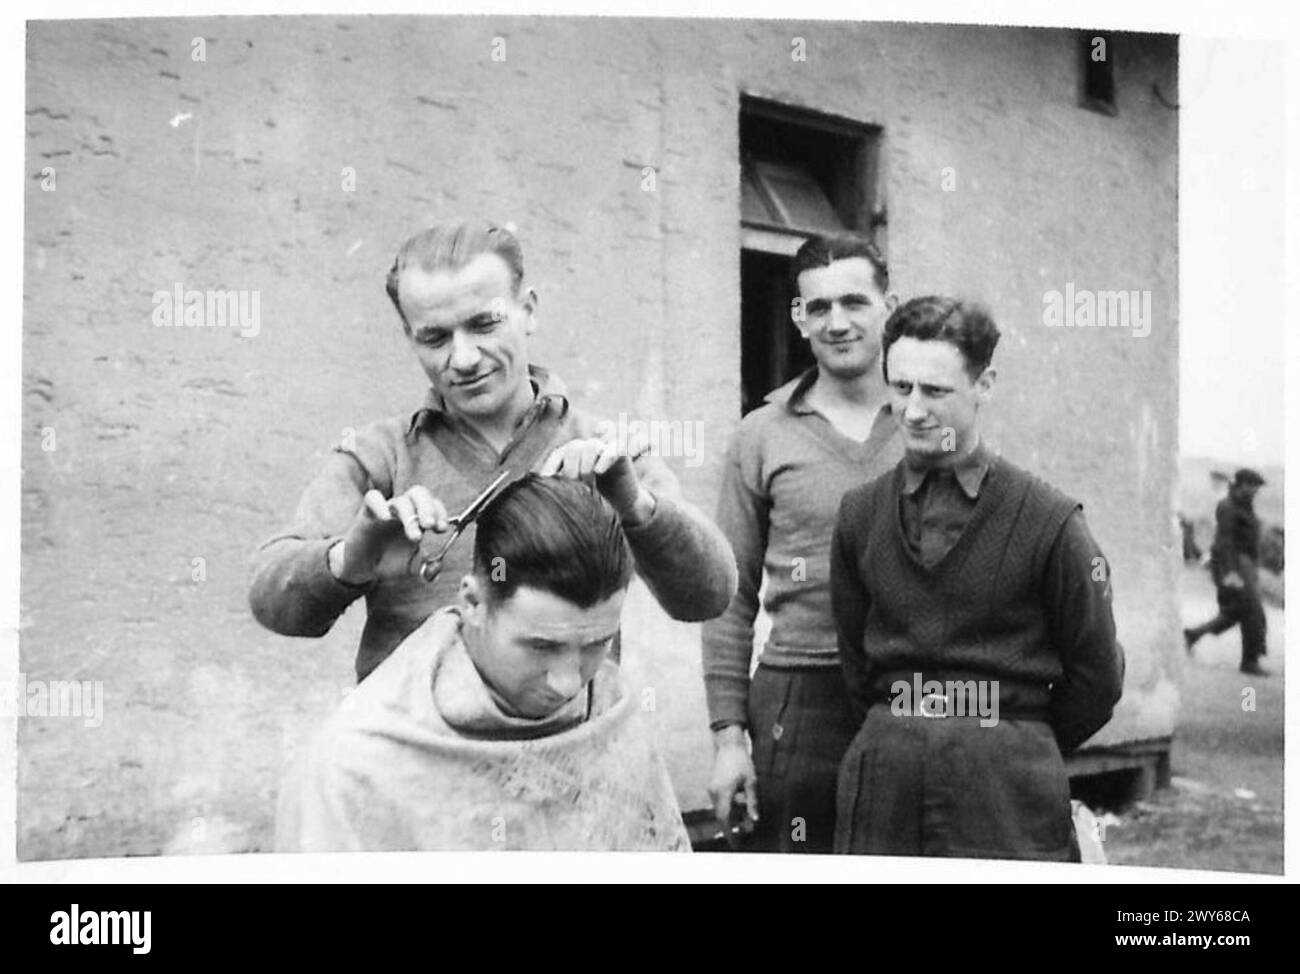 THE LIBERATION OF STALAG 7A, MOOSBURG, GERMANY - The barber is Gunner Gerald Shirley, Royal Artillery aged 15 years; 7 years in the army, prisoner of war 5 years. He was captured at St.Valery in France, 12th June 1940 and had been a P.O.W. in France, Italy and Germany. In all the camps and Stalags during his captivity he had been employed as a hairdreesser. He escaped twice to Spain but was refused entry. Gunner Shirley is not married and his home address is 5 Tregarne Terrace, St.Austel, Cornwall. , British Army, 21st Army Group Stock Photo